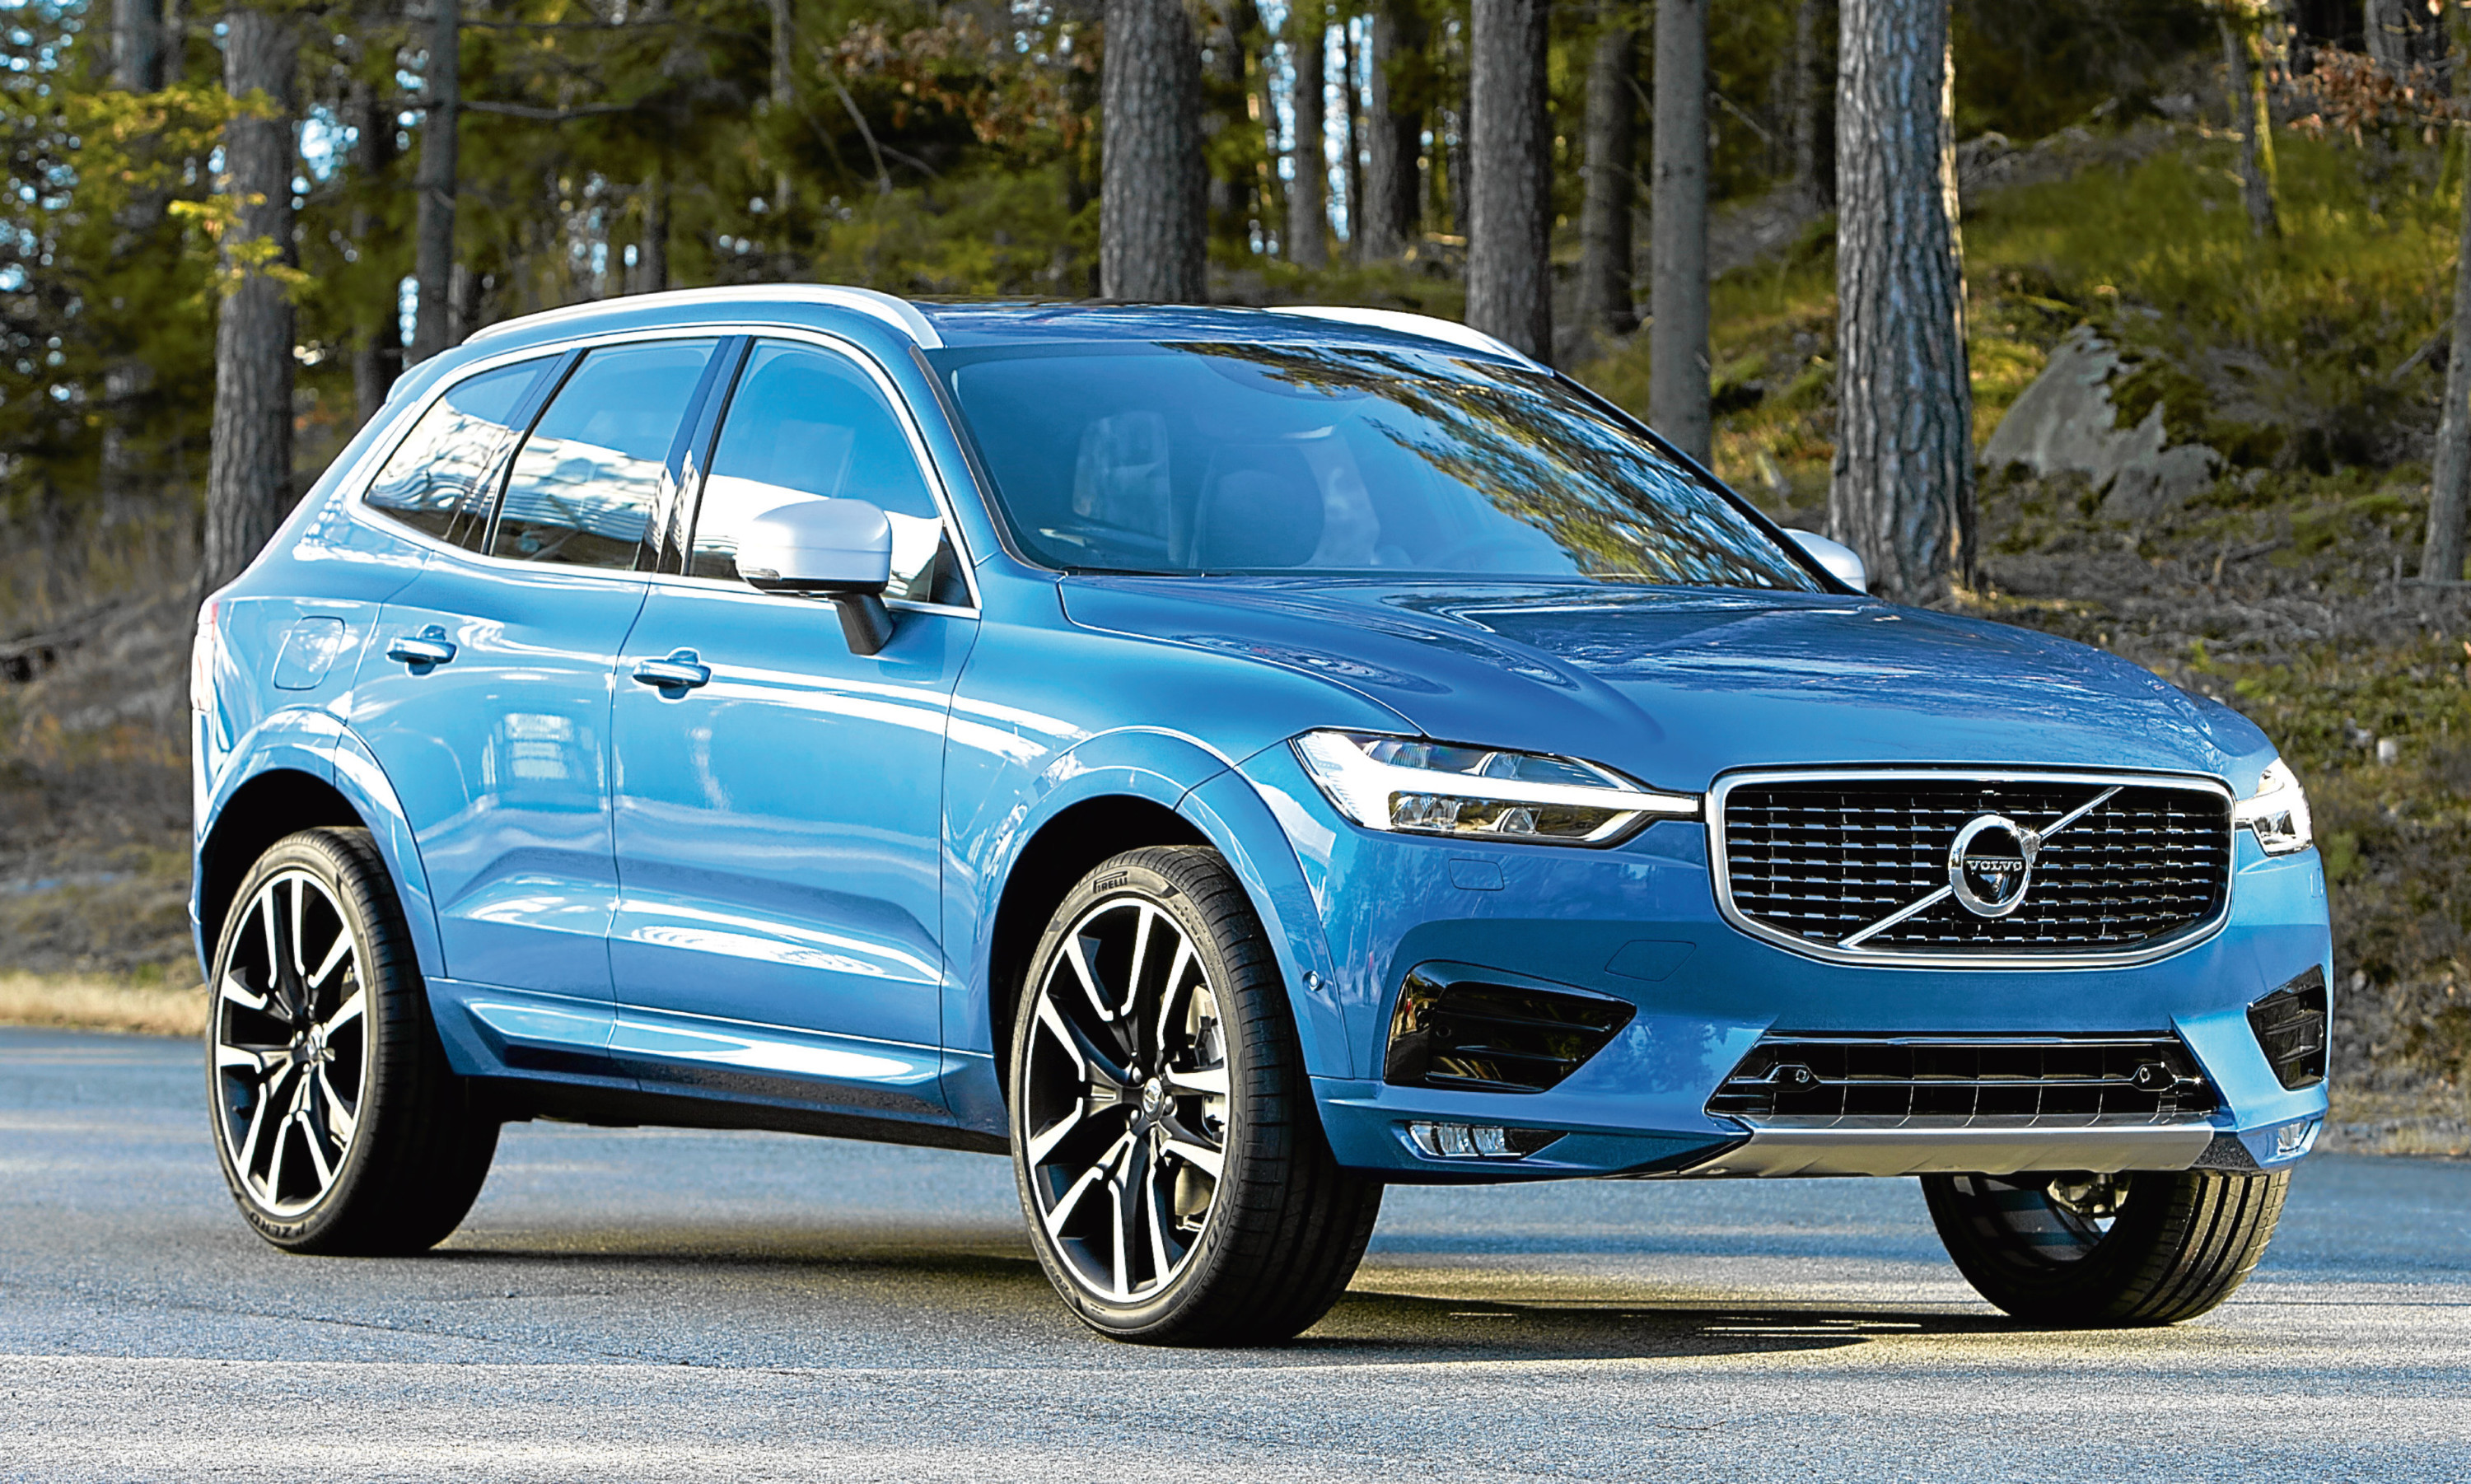 Wraps off second generation Volvo XC60 - The Courier